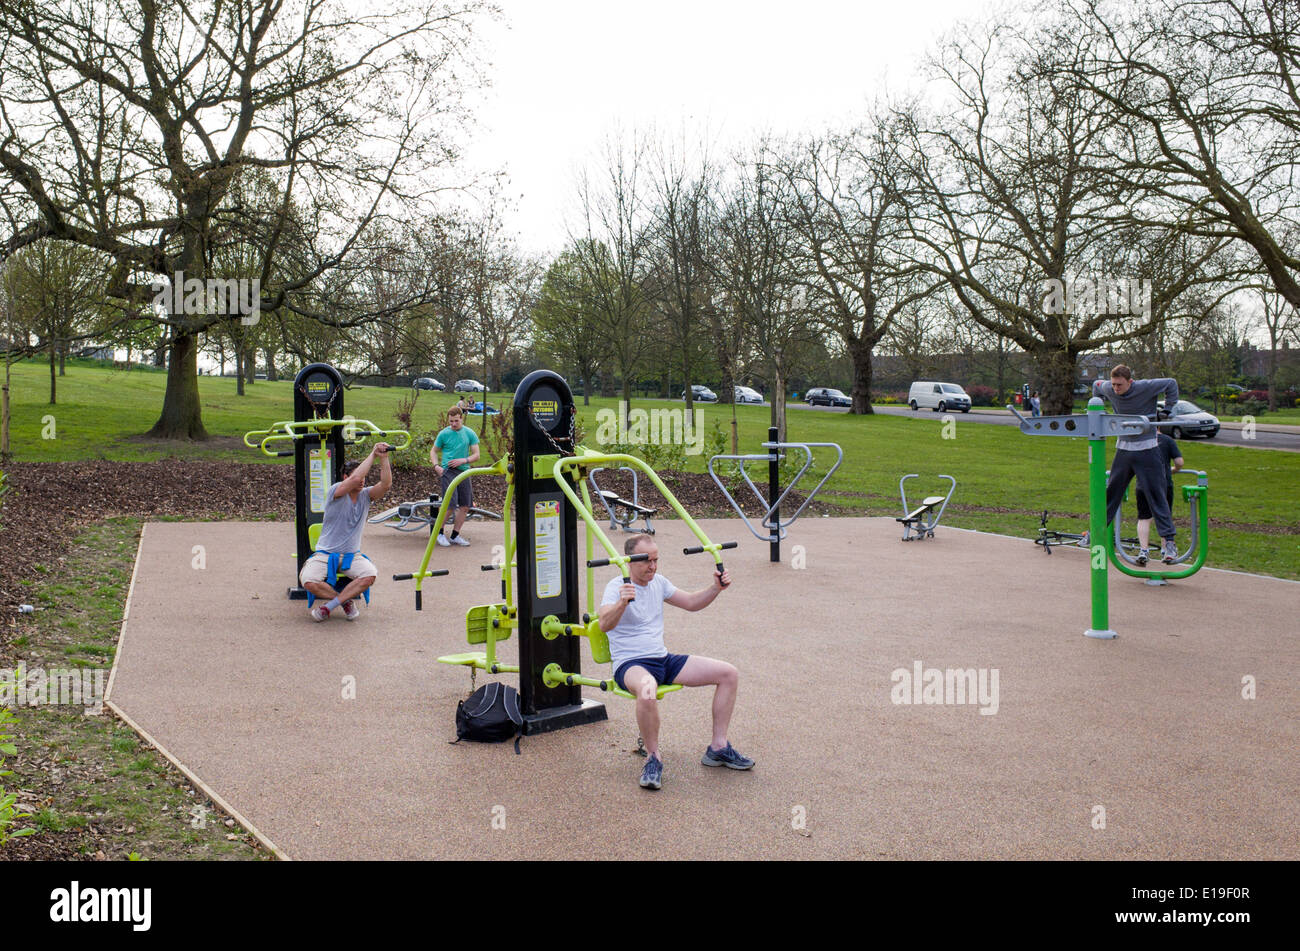 people-exercising-at-outdoor-gym-in-finsbury-park-haringey-london-E19F0R.jpg